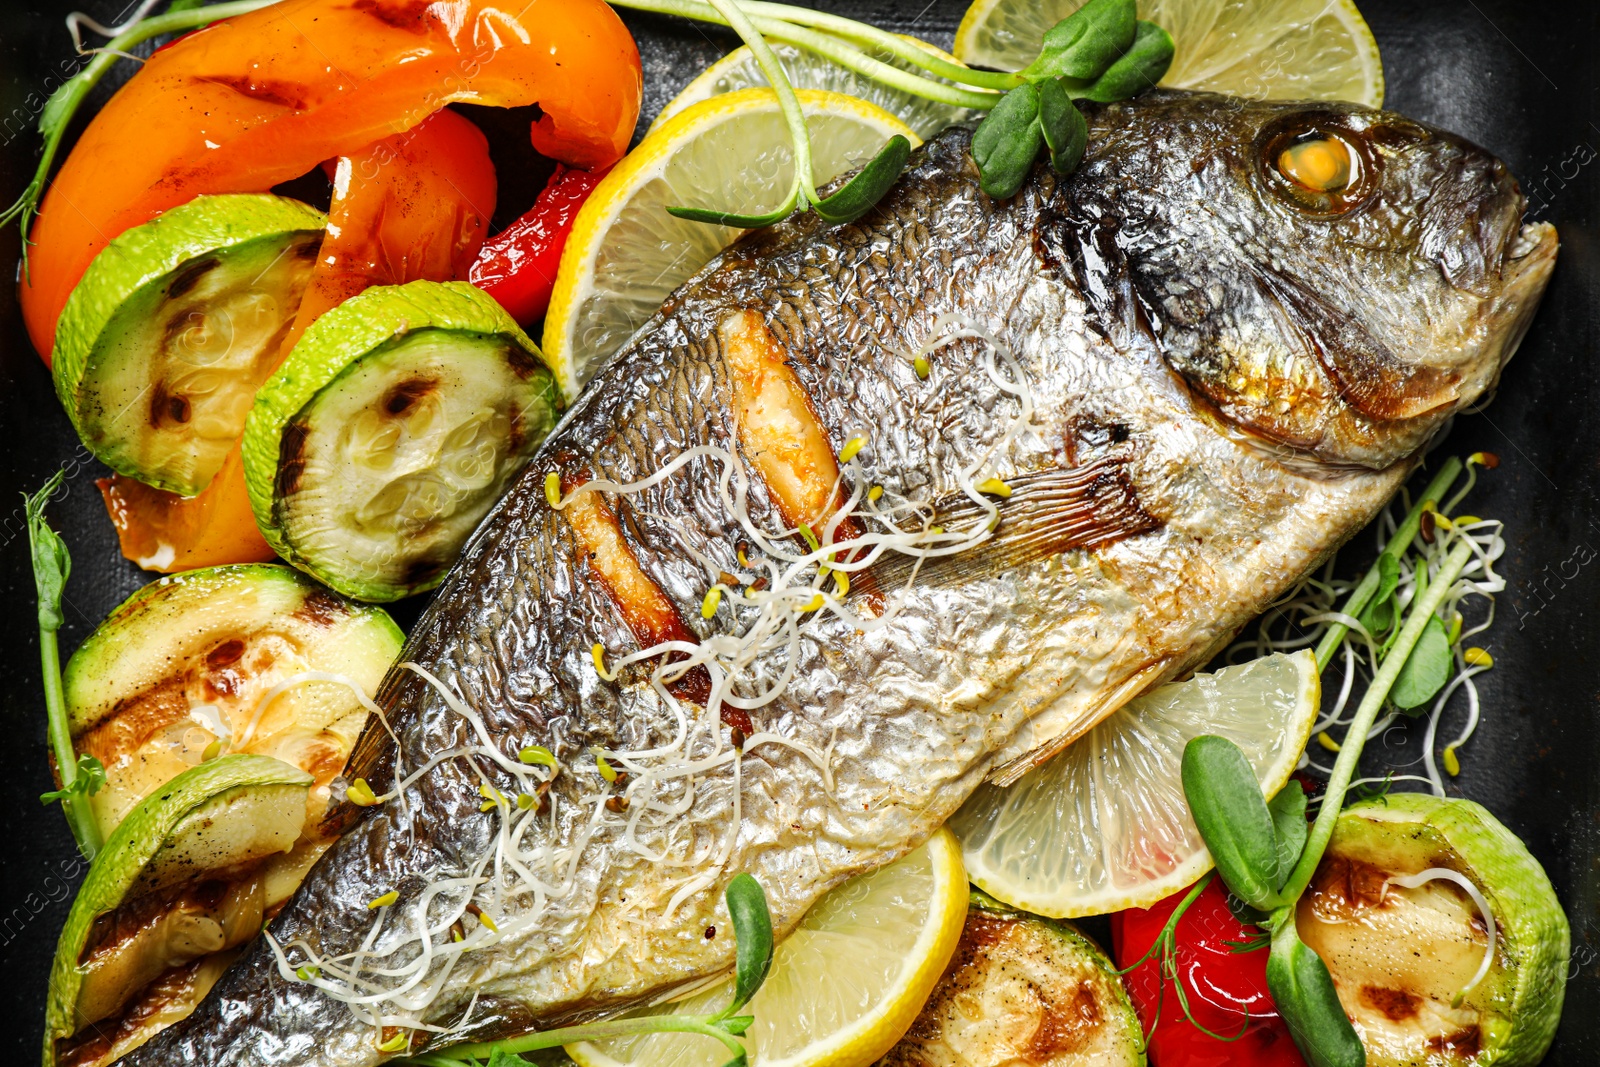 Photo of Delicious roasted fish and vegetables in pan, top view